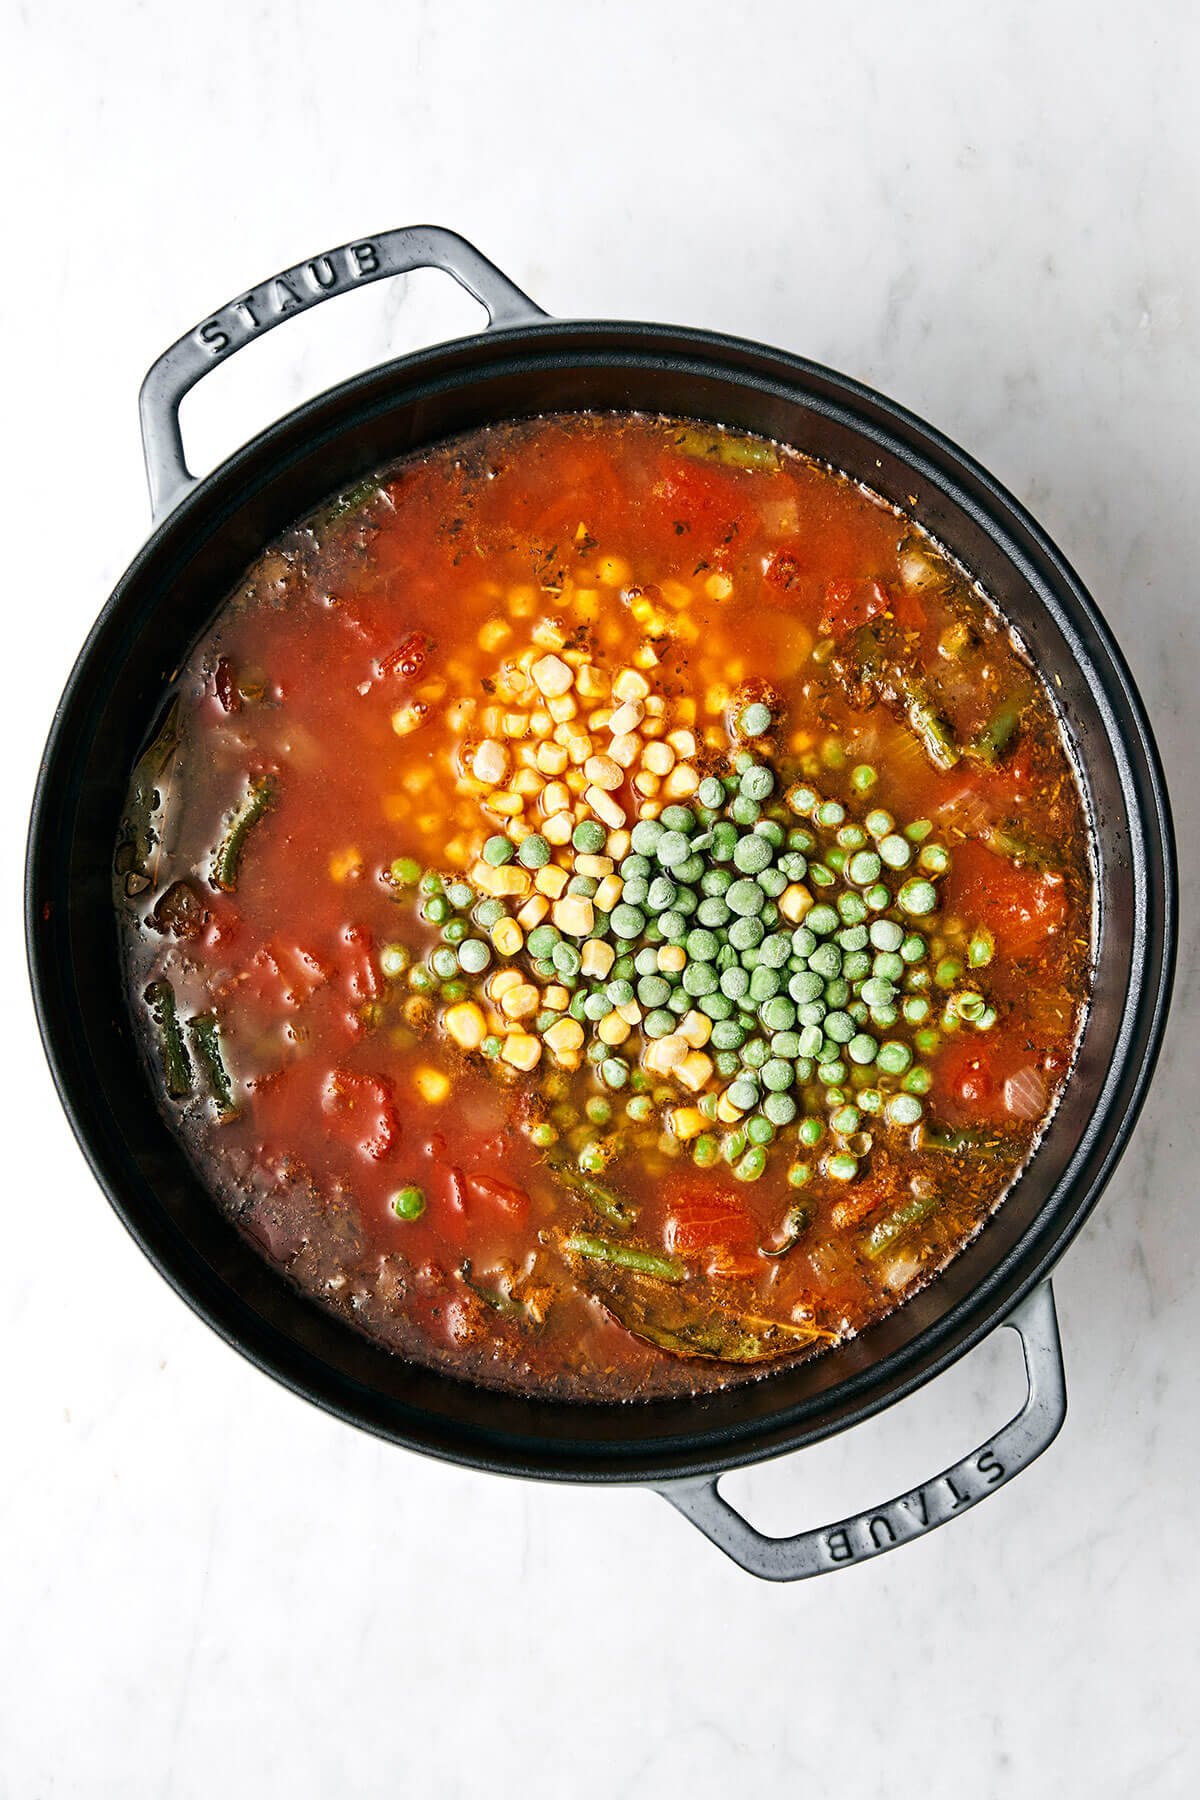 Cooking vegetable soup in a pot